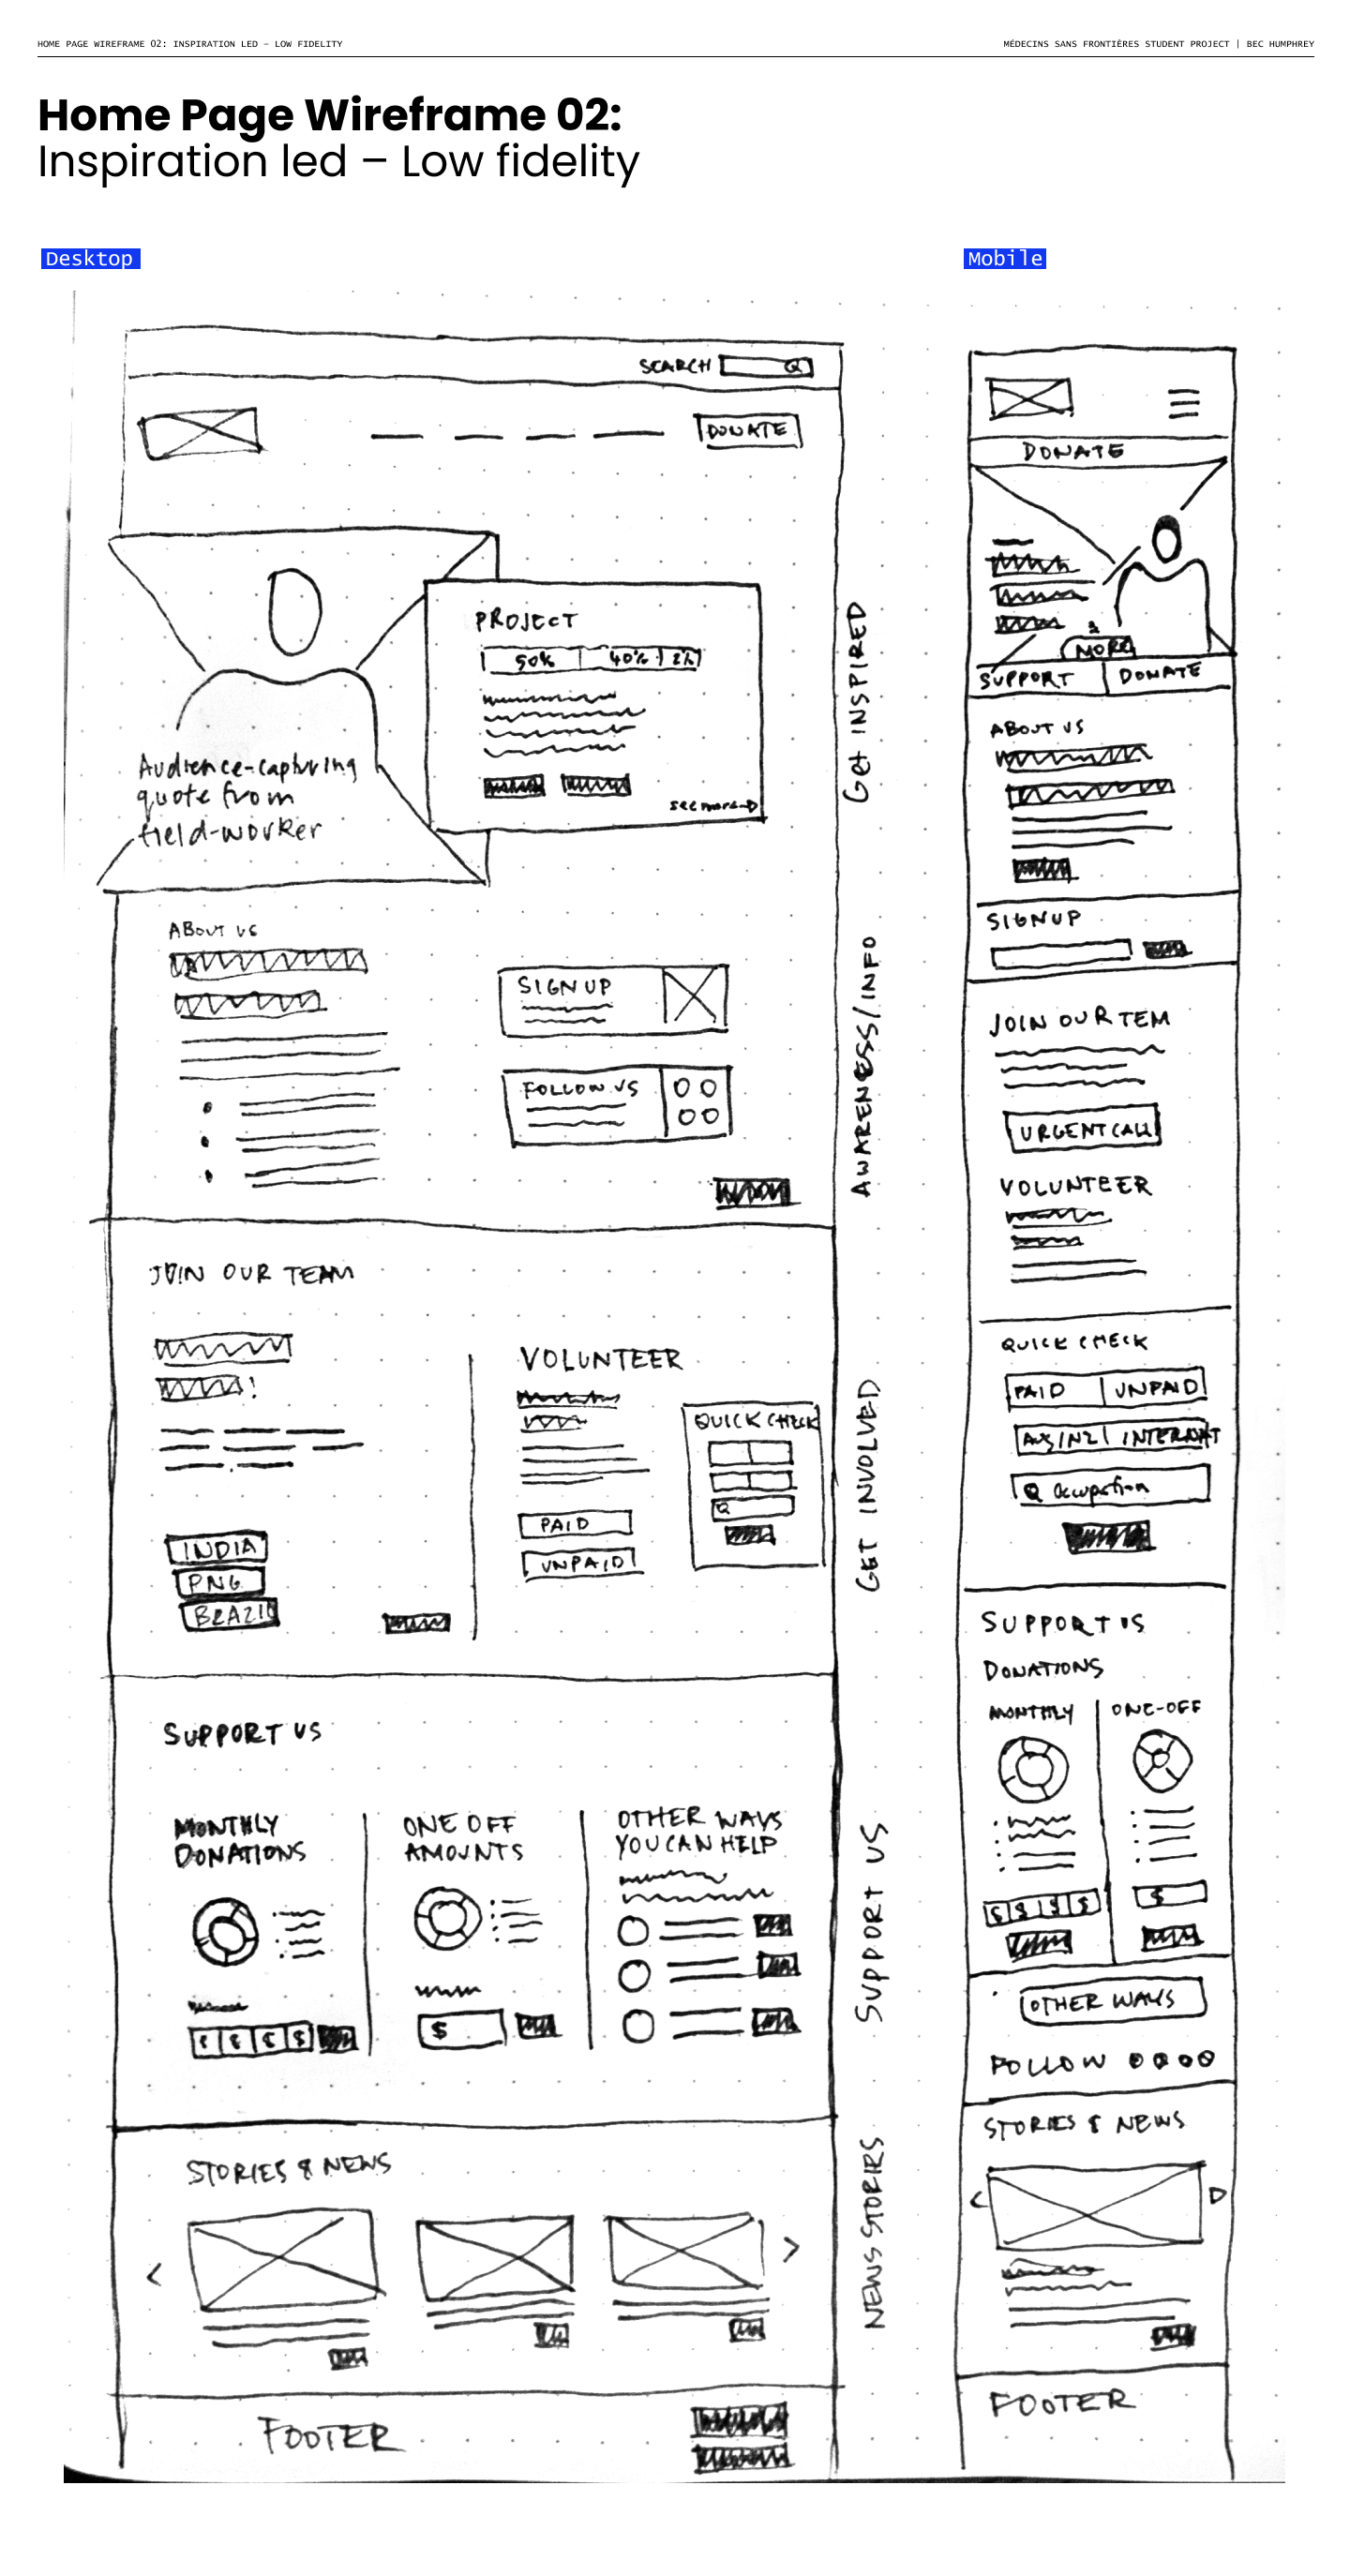 Bec_03 Home Page Wireframe 02_ Inspiration led – Low fidelity